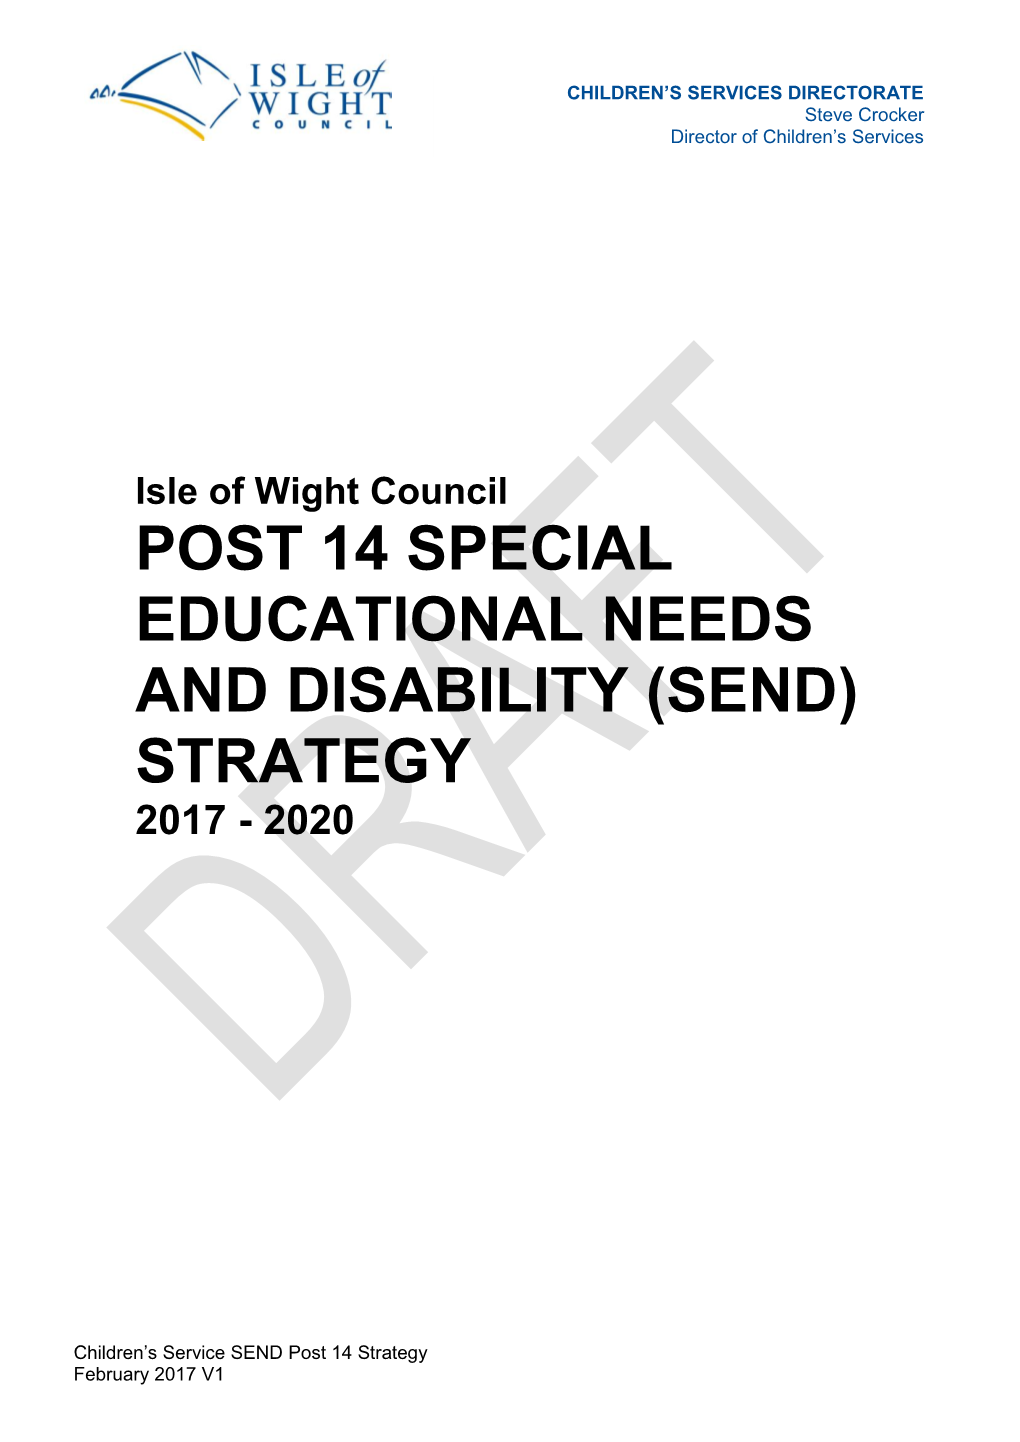 Post 14 Special Educational Needs and Disability (Send) Strategy 2017 - 2020